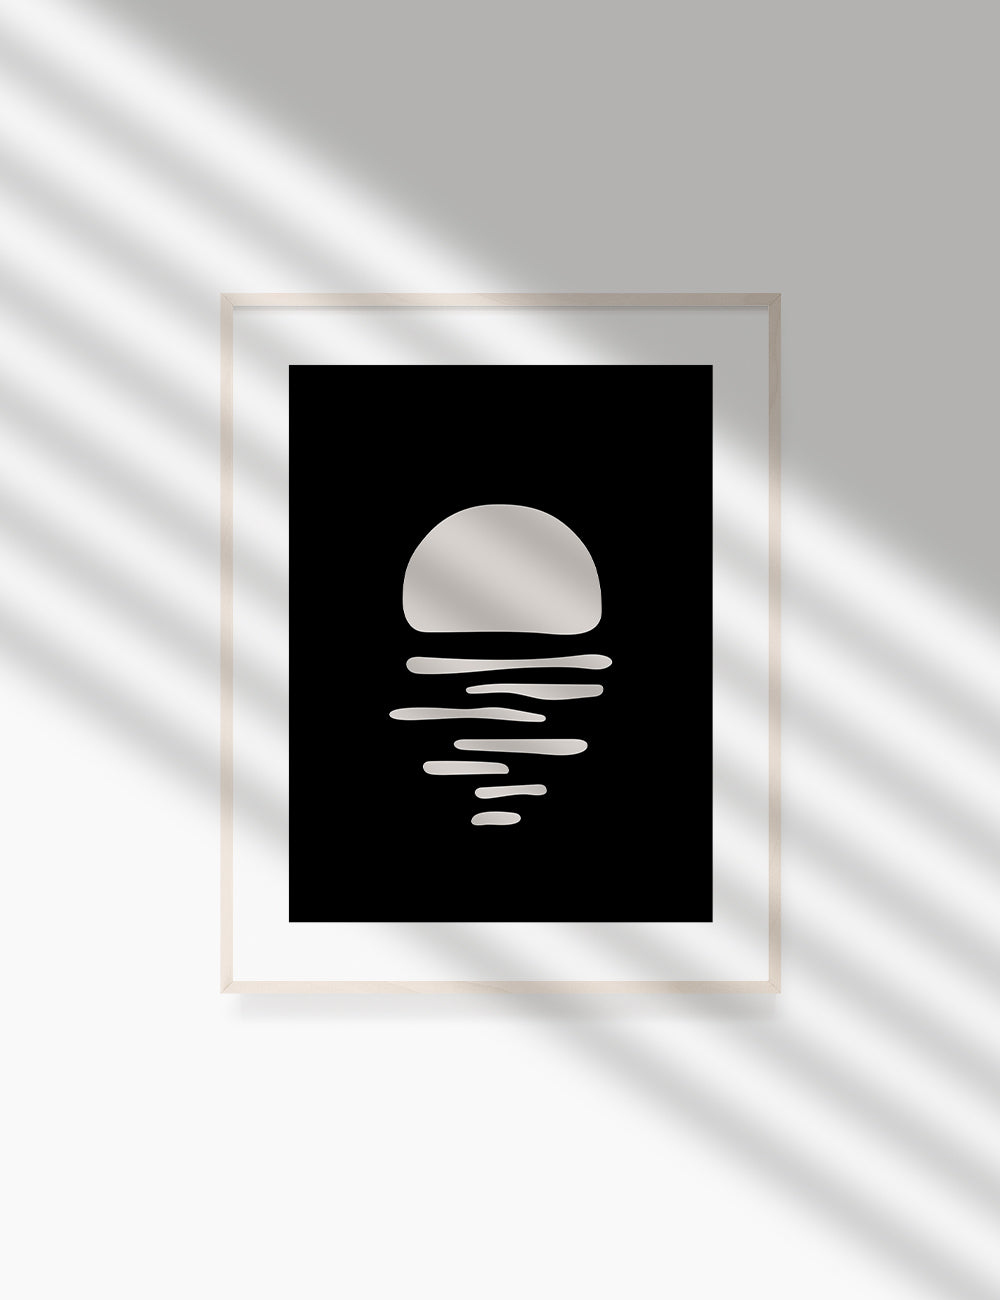 Black and Beige Minimalist Art. Abstract Sun/Moon Reflection on the Water.